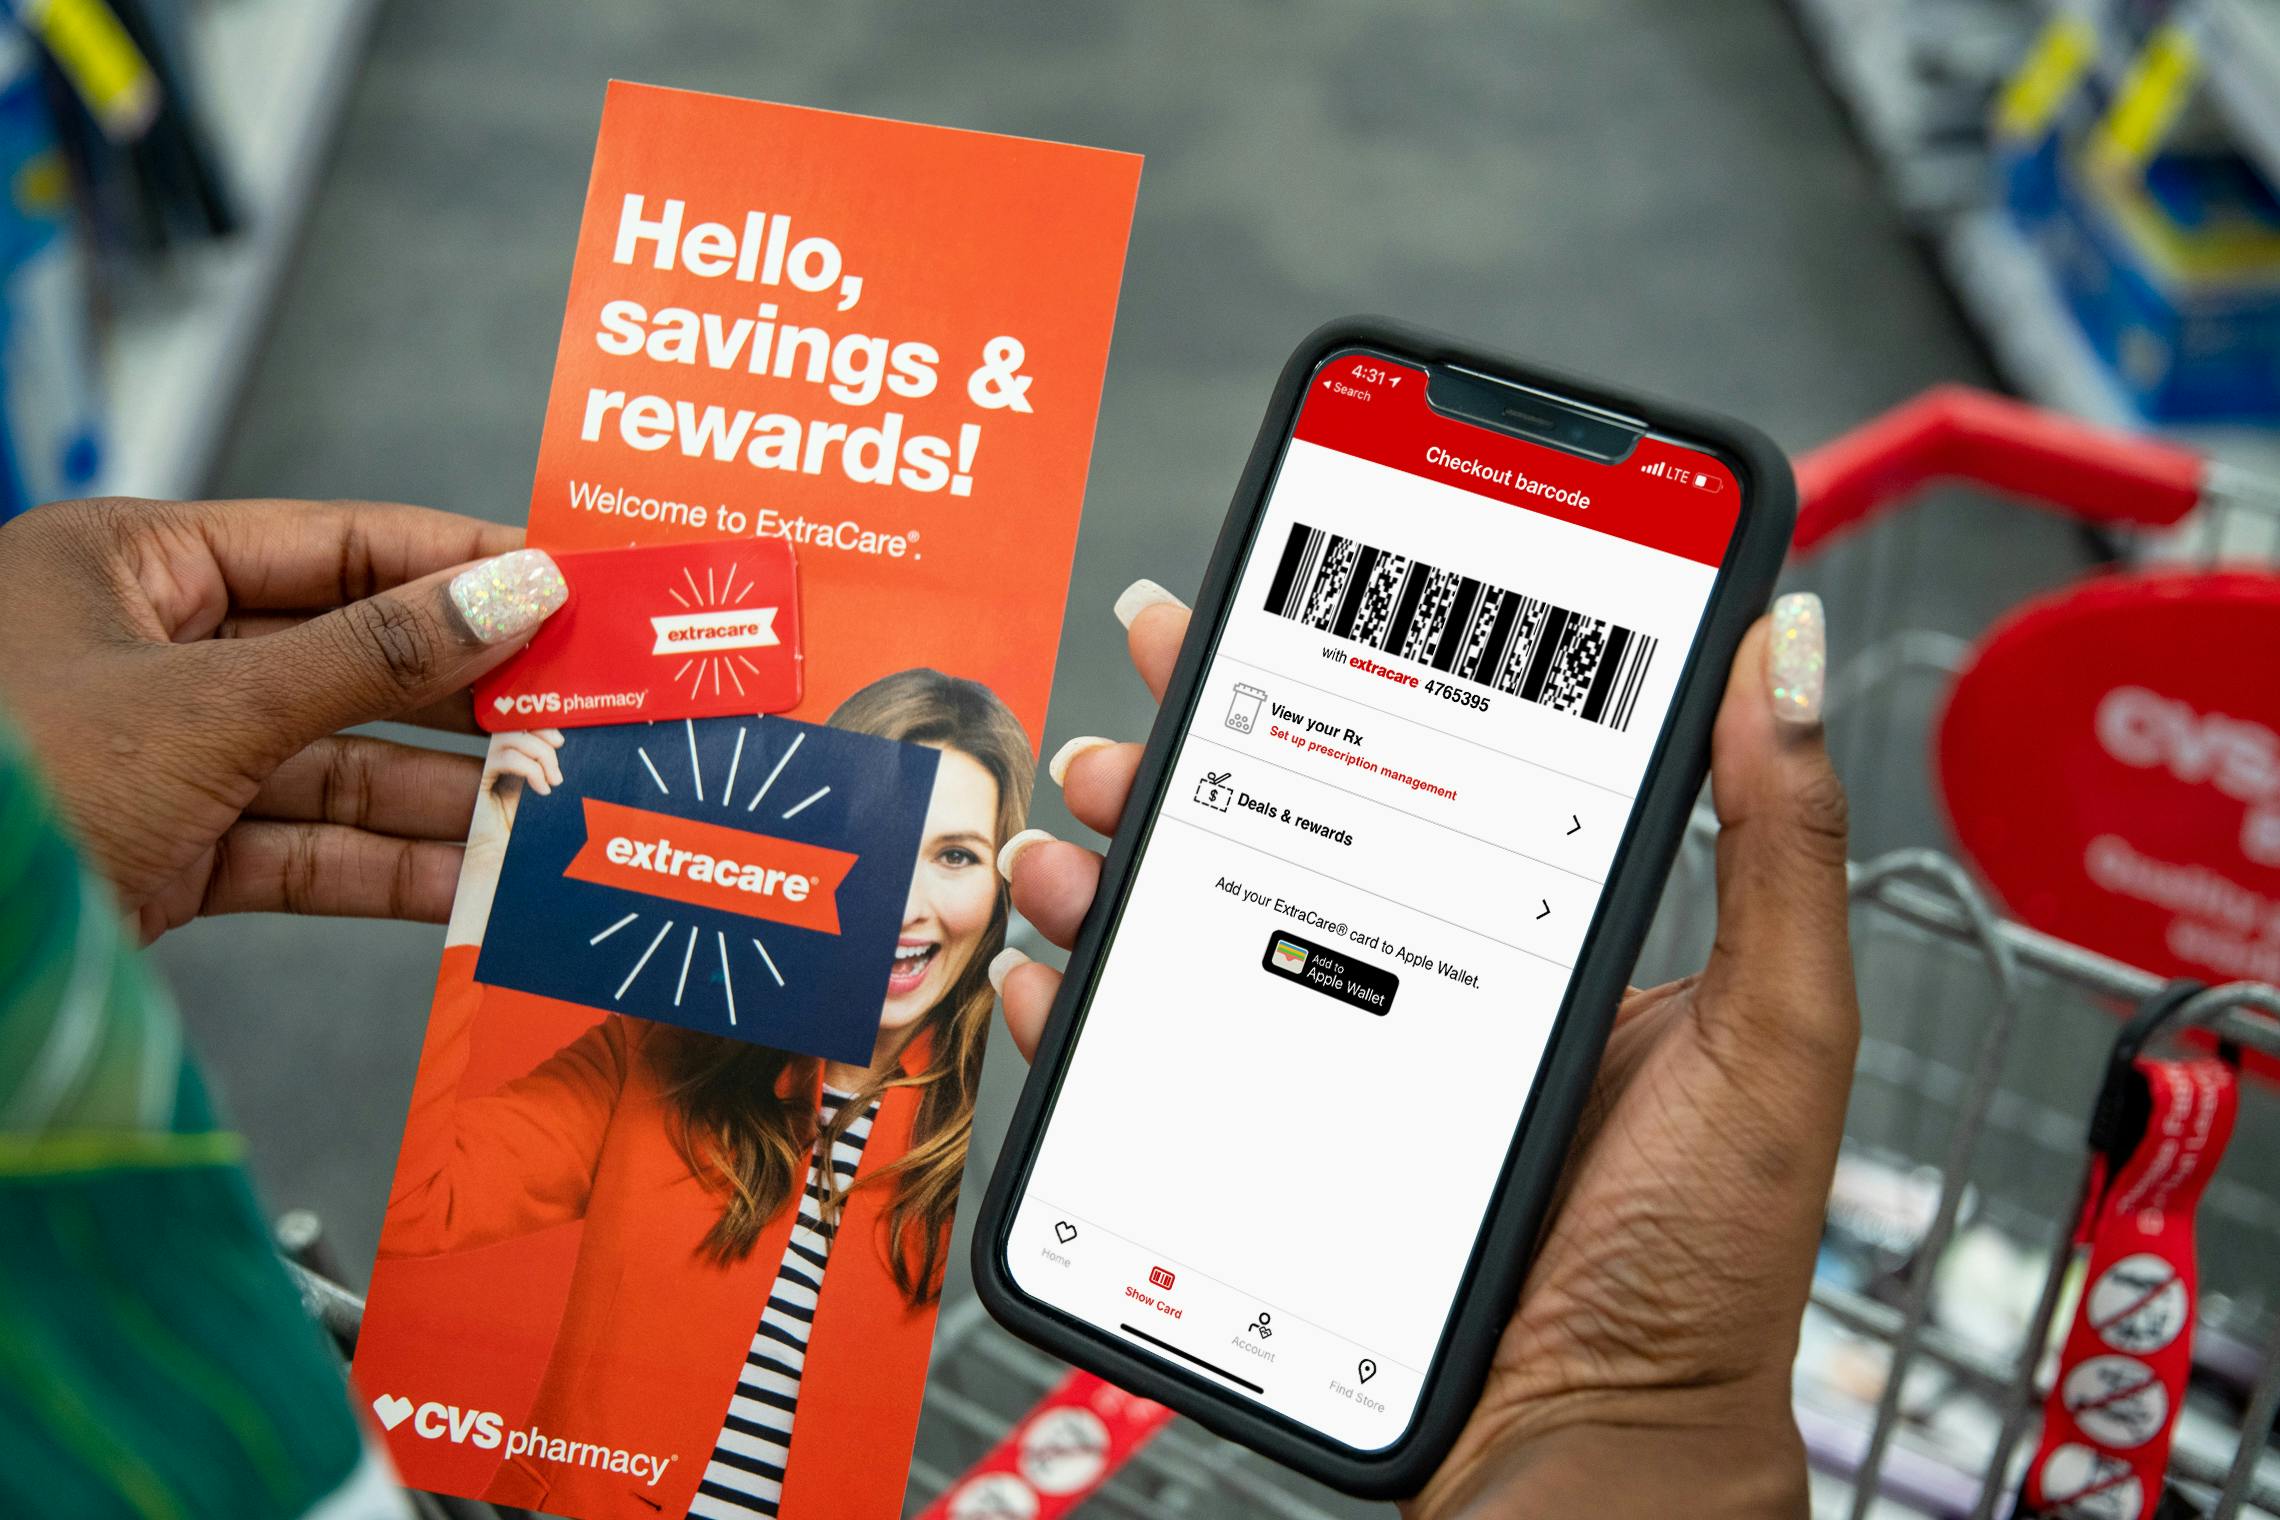 A woman holding an iphone with the CVS app, a rewards key chain card, and an extracare rewards pamphlet.